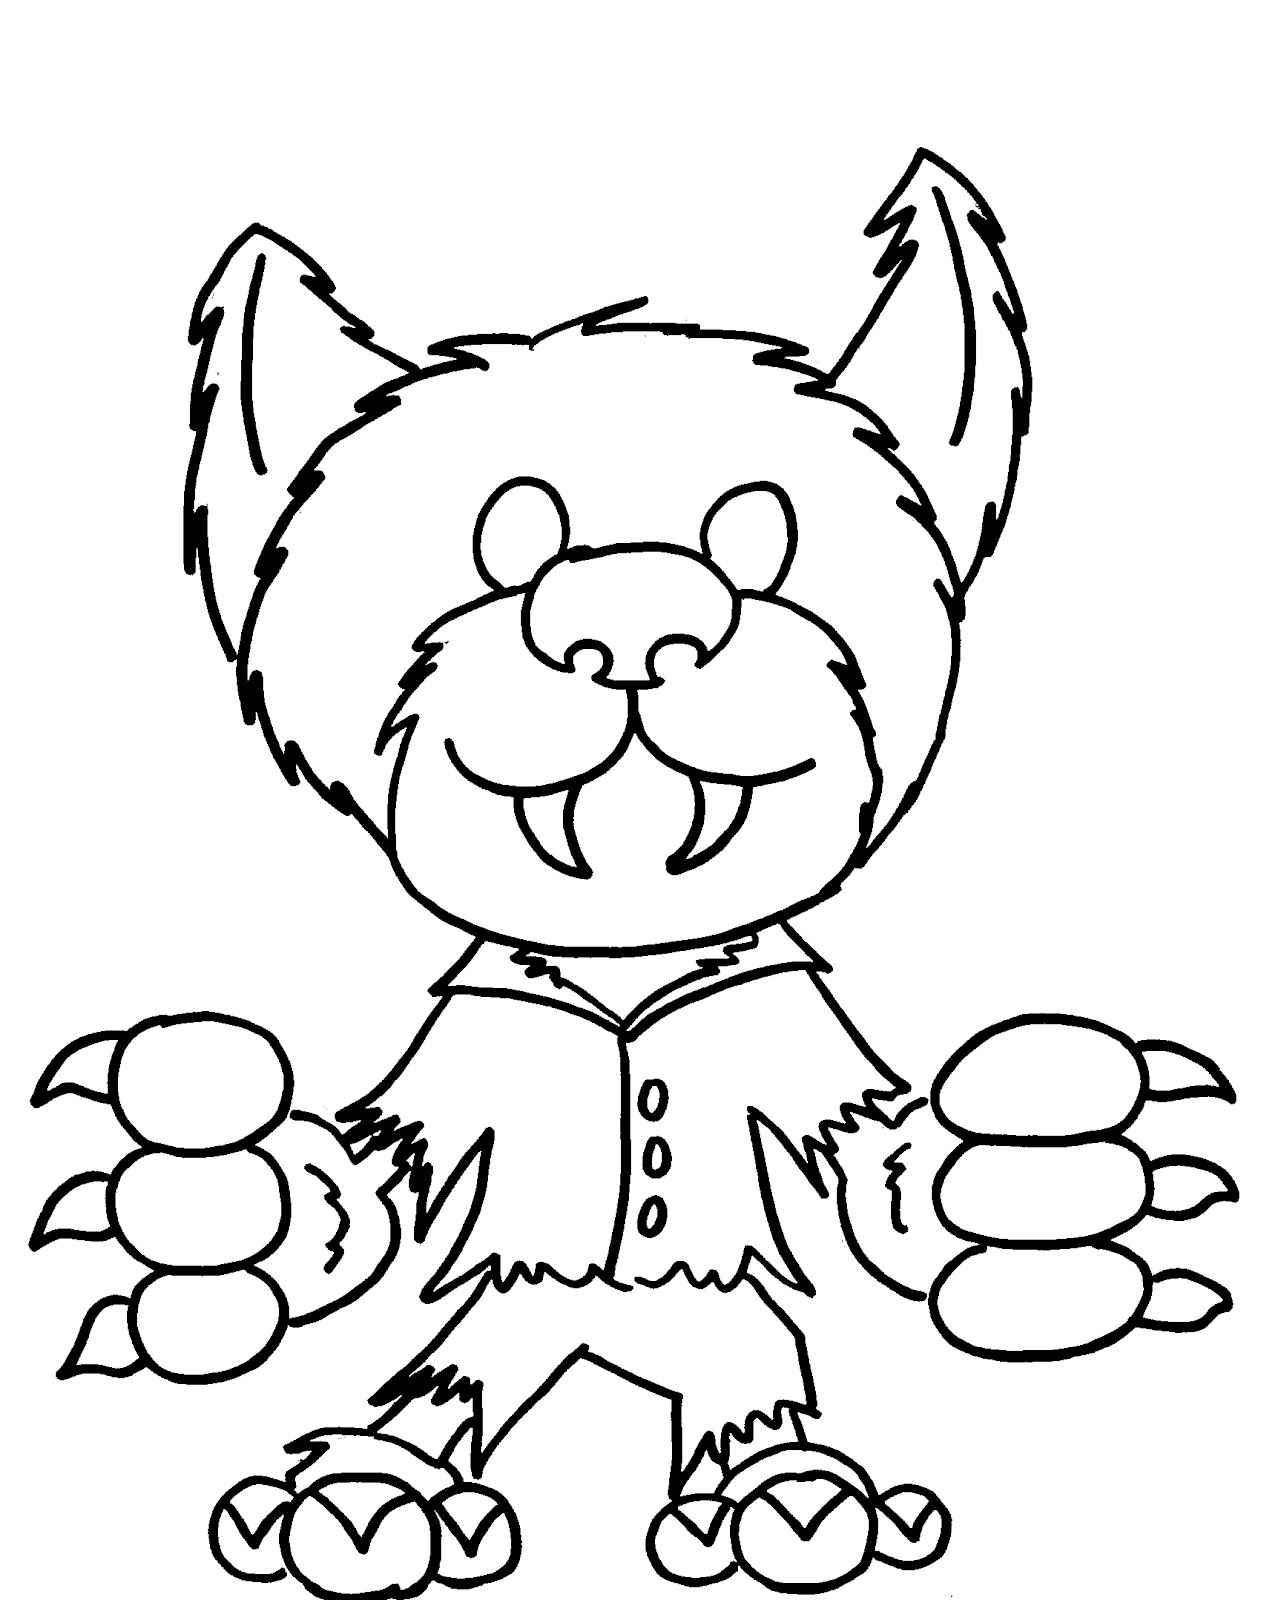 Cute Werewolf Coloring Page - Free Printable Coloring Pages for Kids